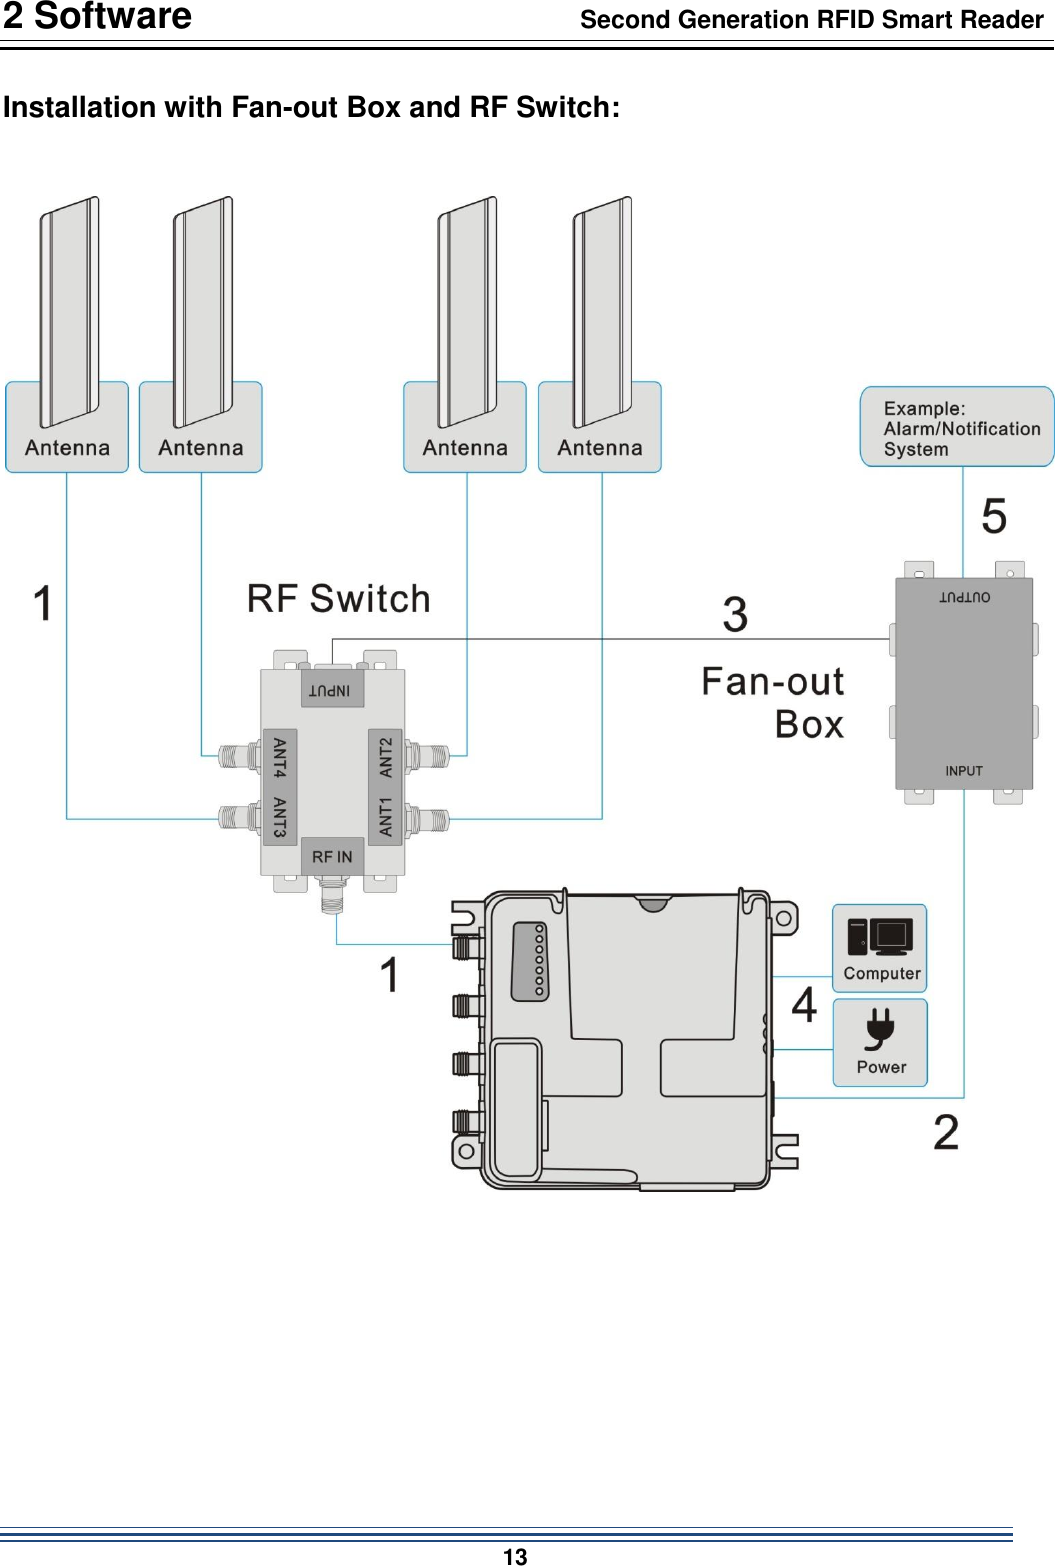 2 Software                                Second Generation RFID Smart Reader                           13  Installation with Fan-out Box and RF Switch:      